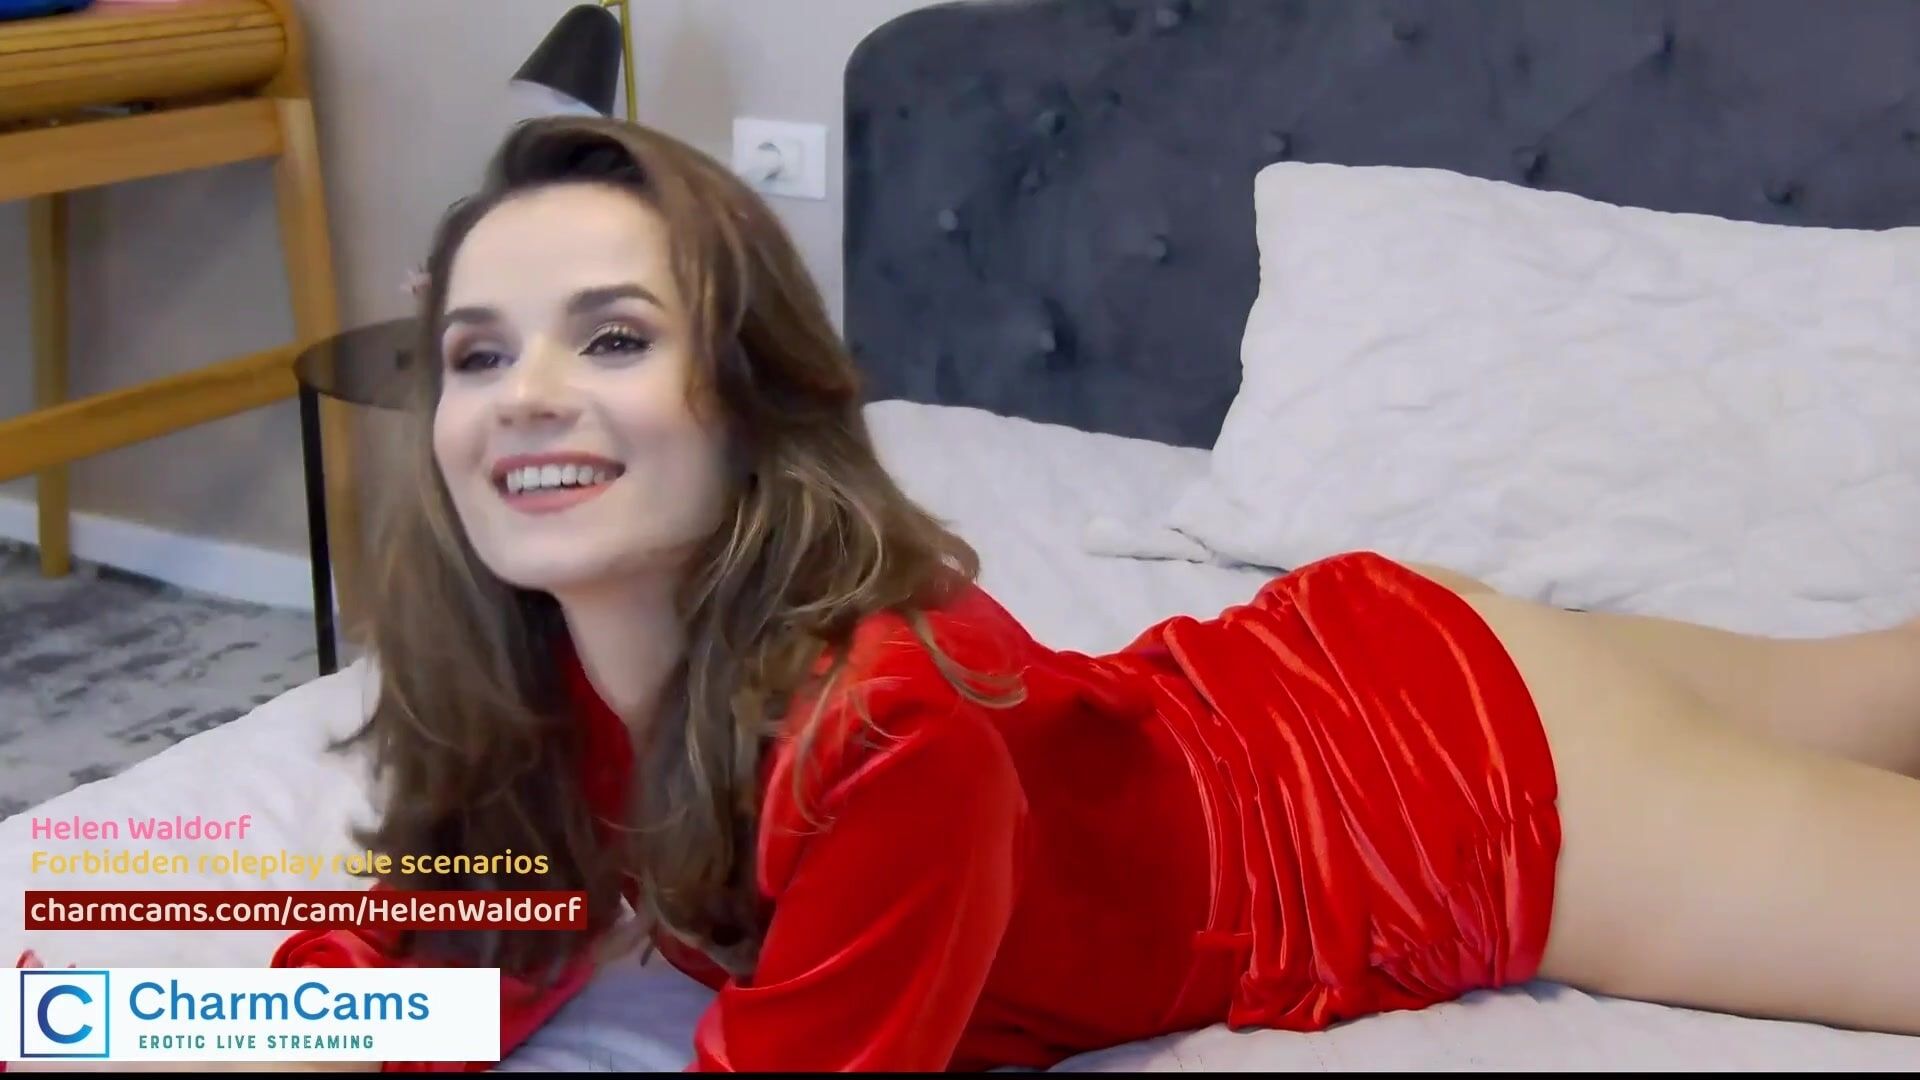 In bed with my red dress. #43